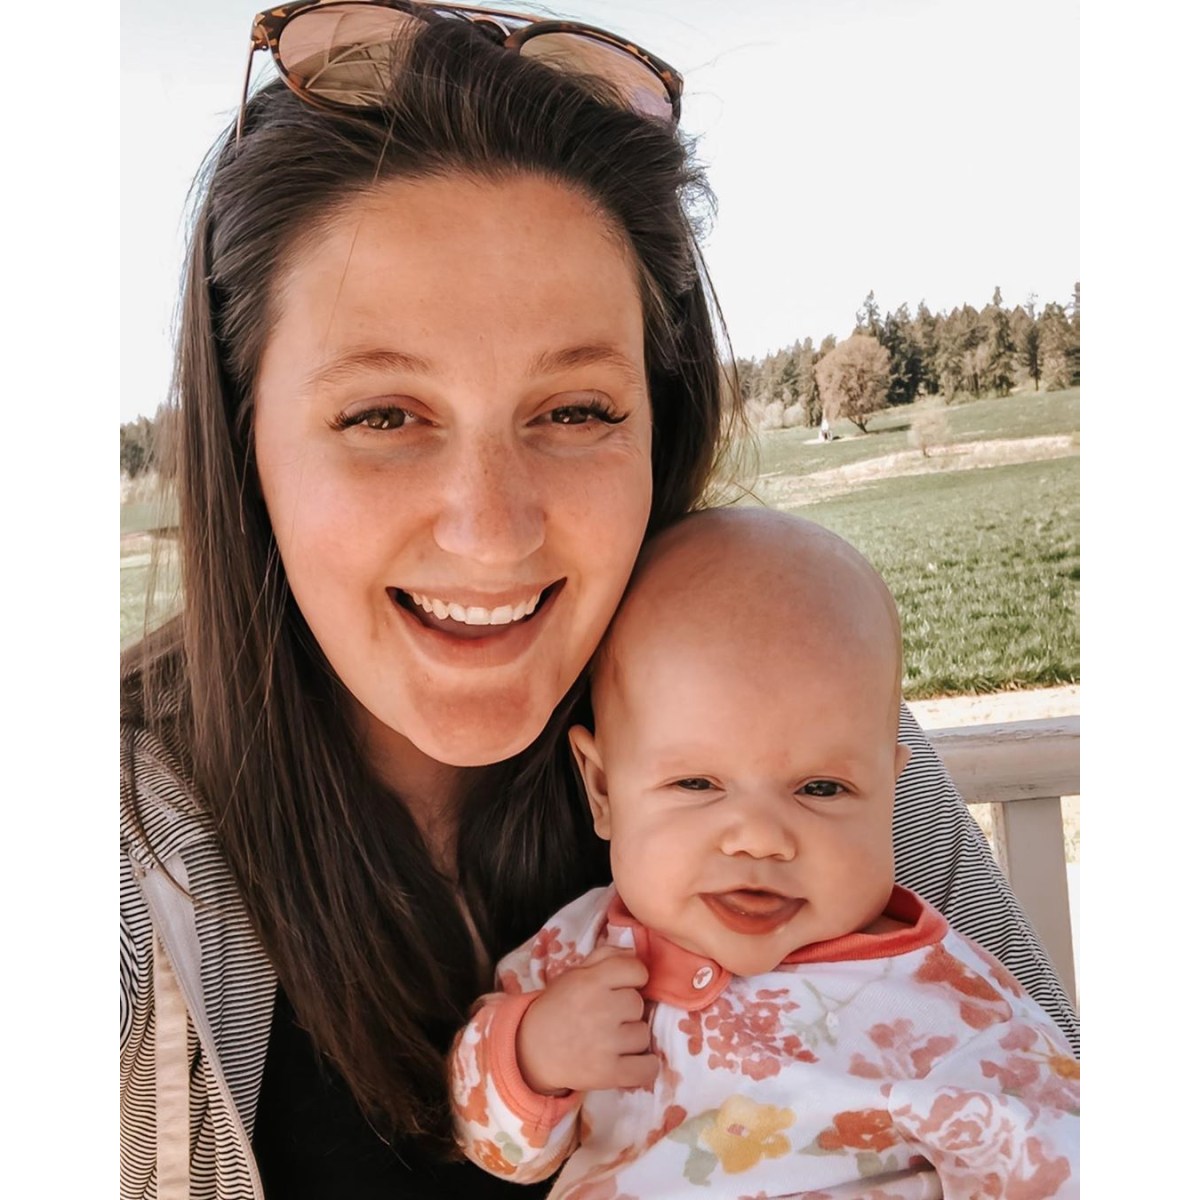 LPBW'S Tori Roloff Shares Lilah Update: 1st Tooth and Eating Struggles